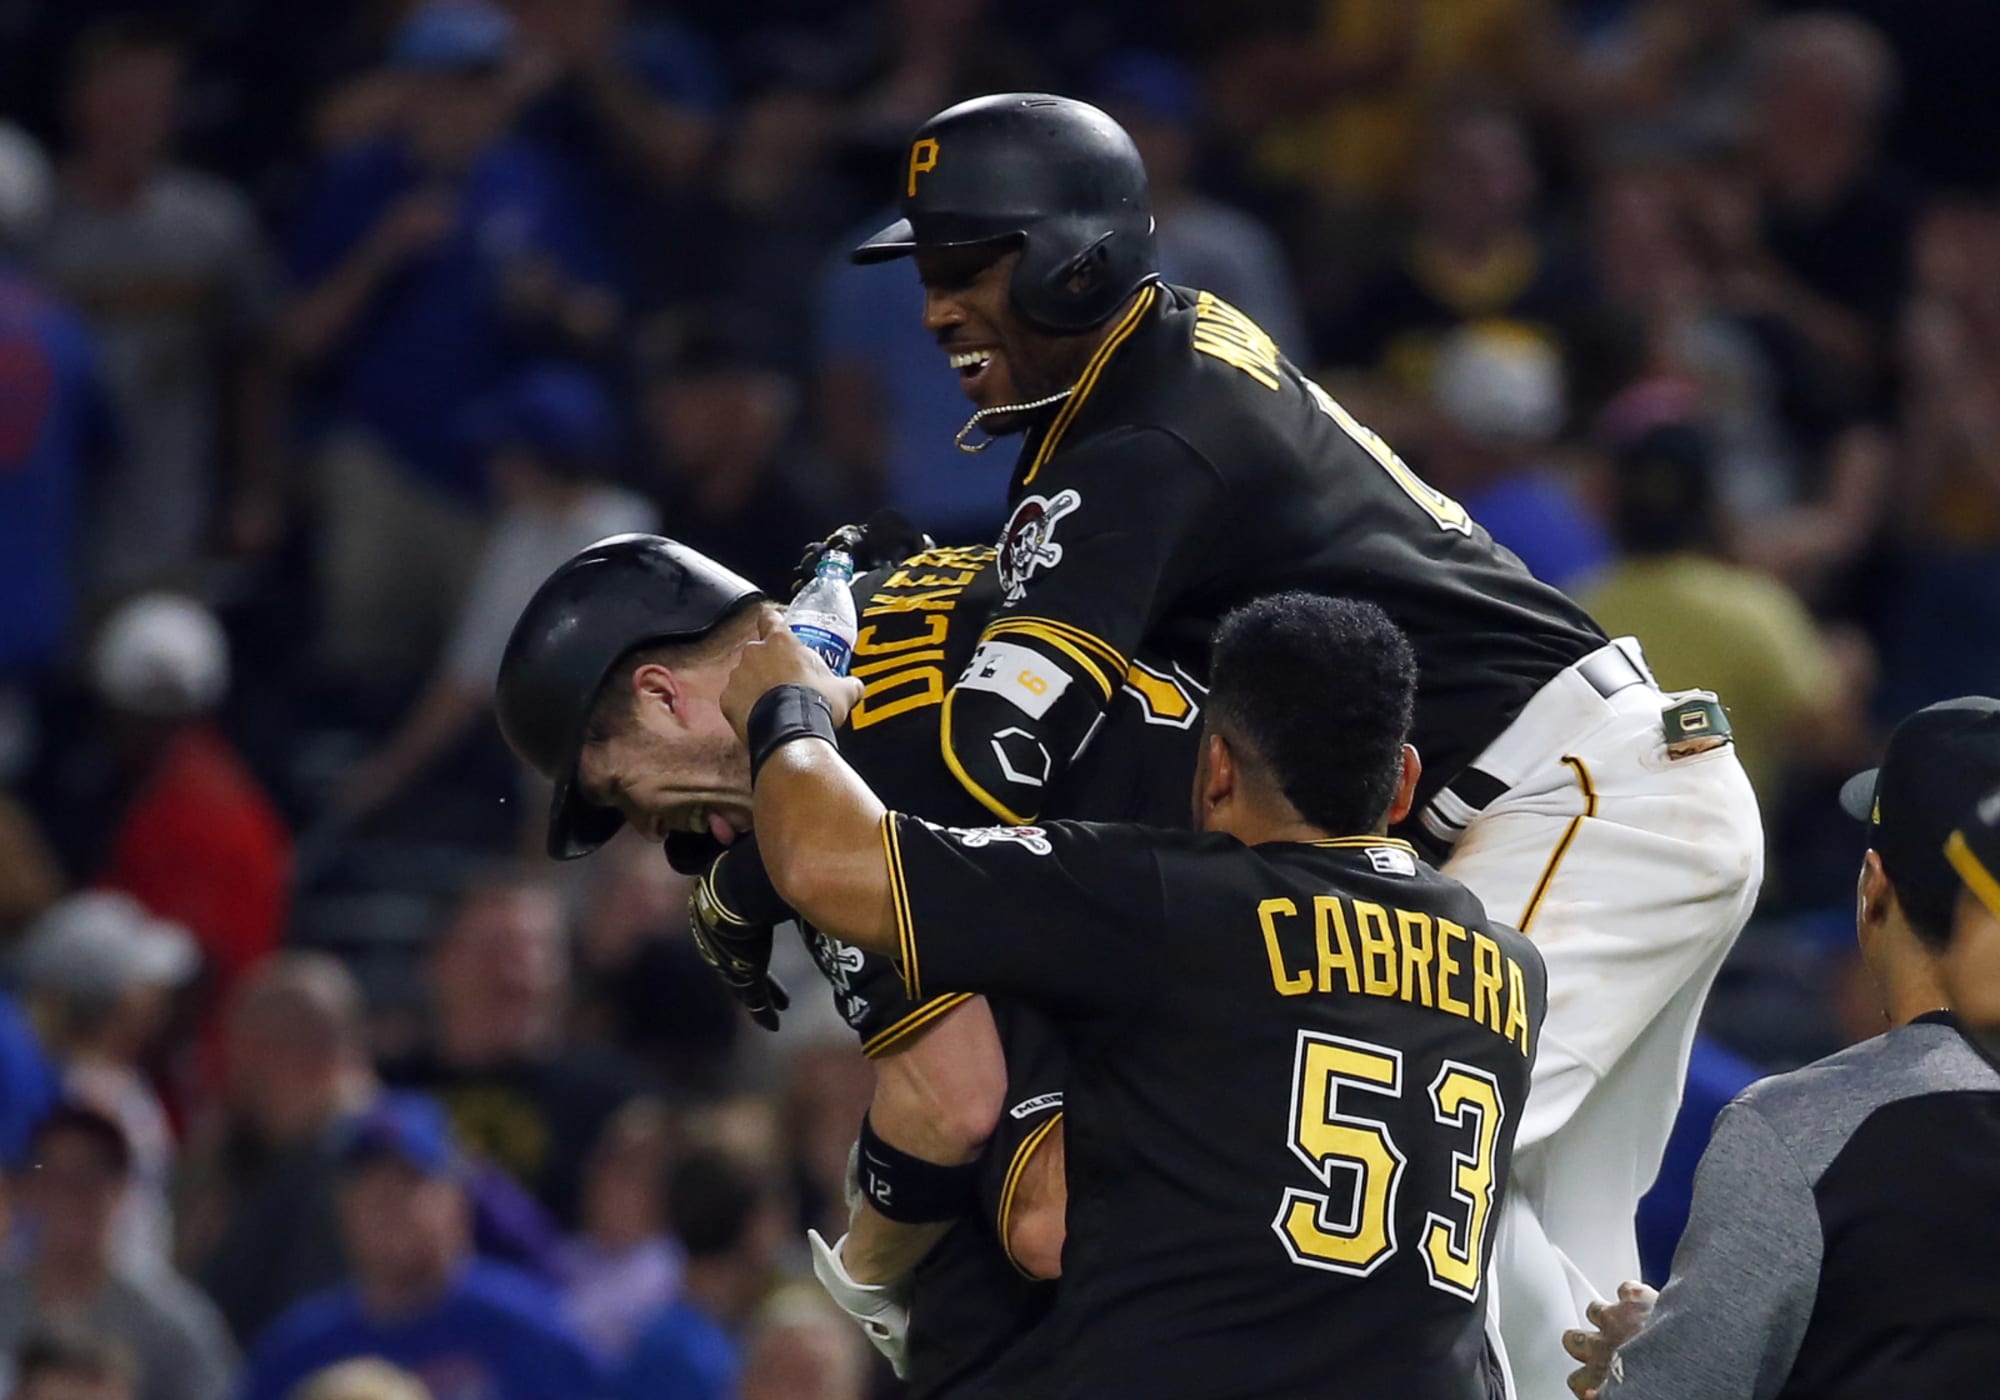 Pittsburgh Pirates Walk Off In Third Straight Victory Over Cubs